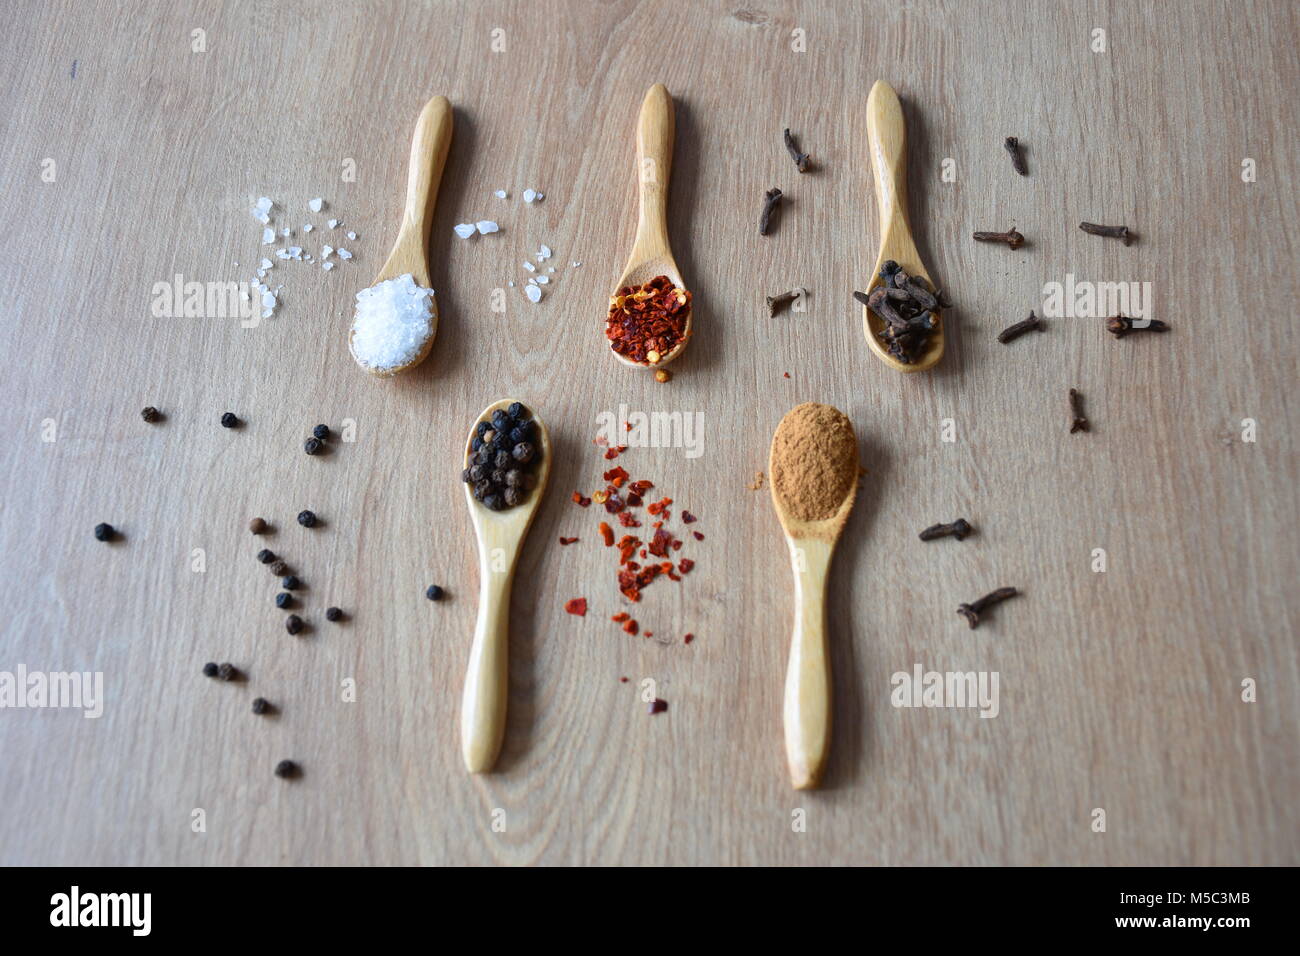 High angle view of the spices Stock Photo